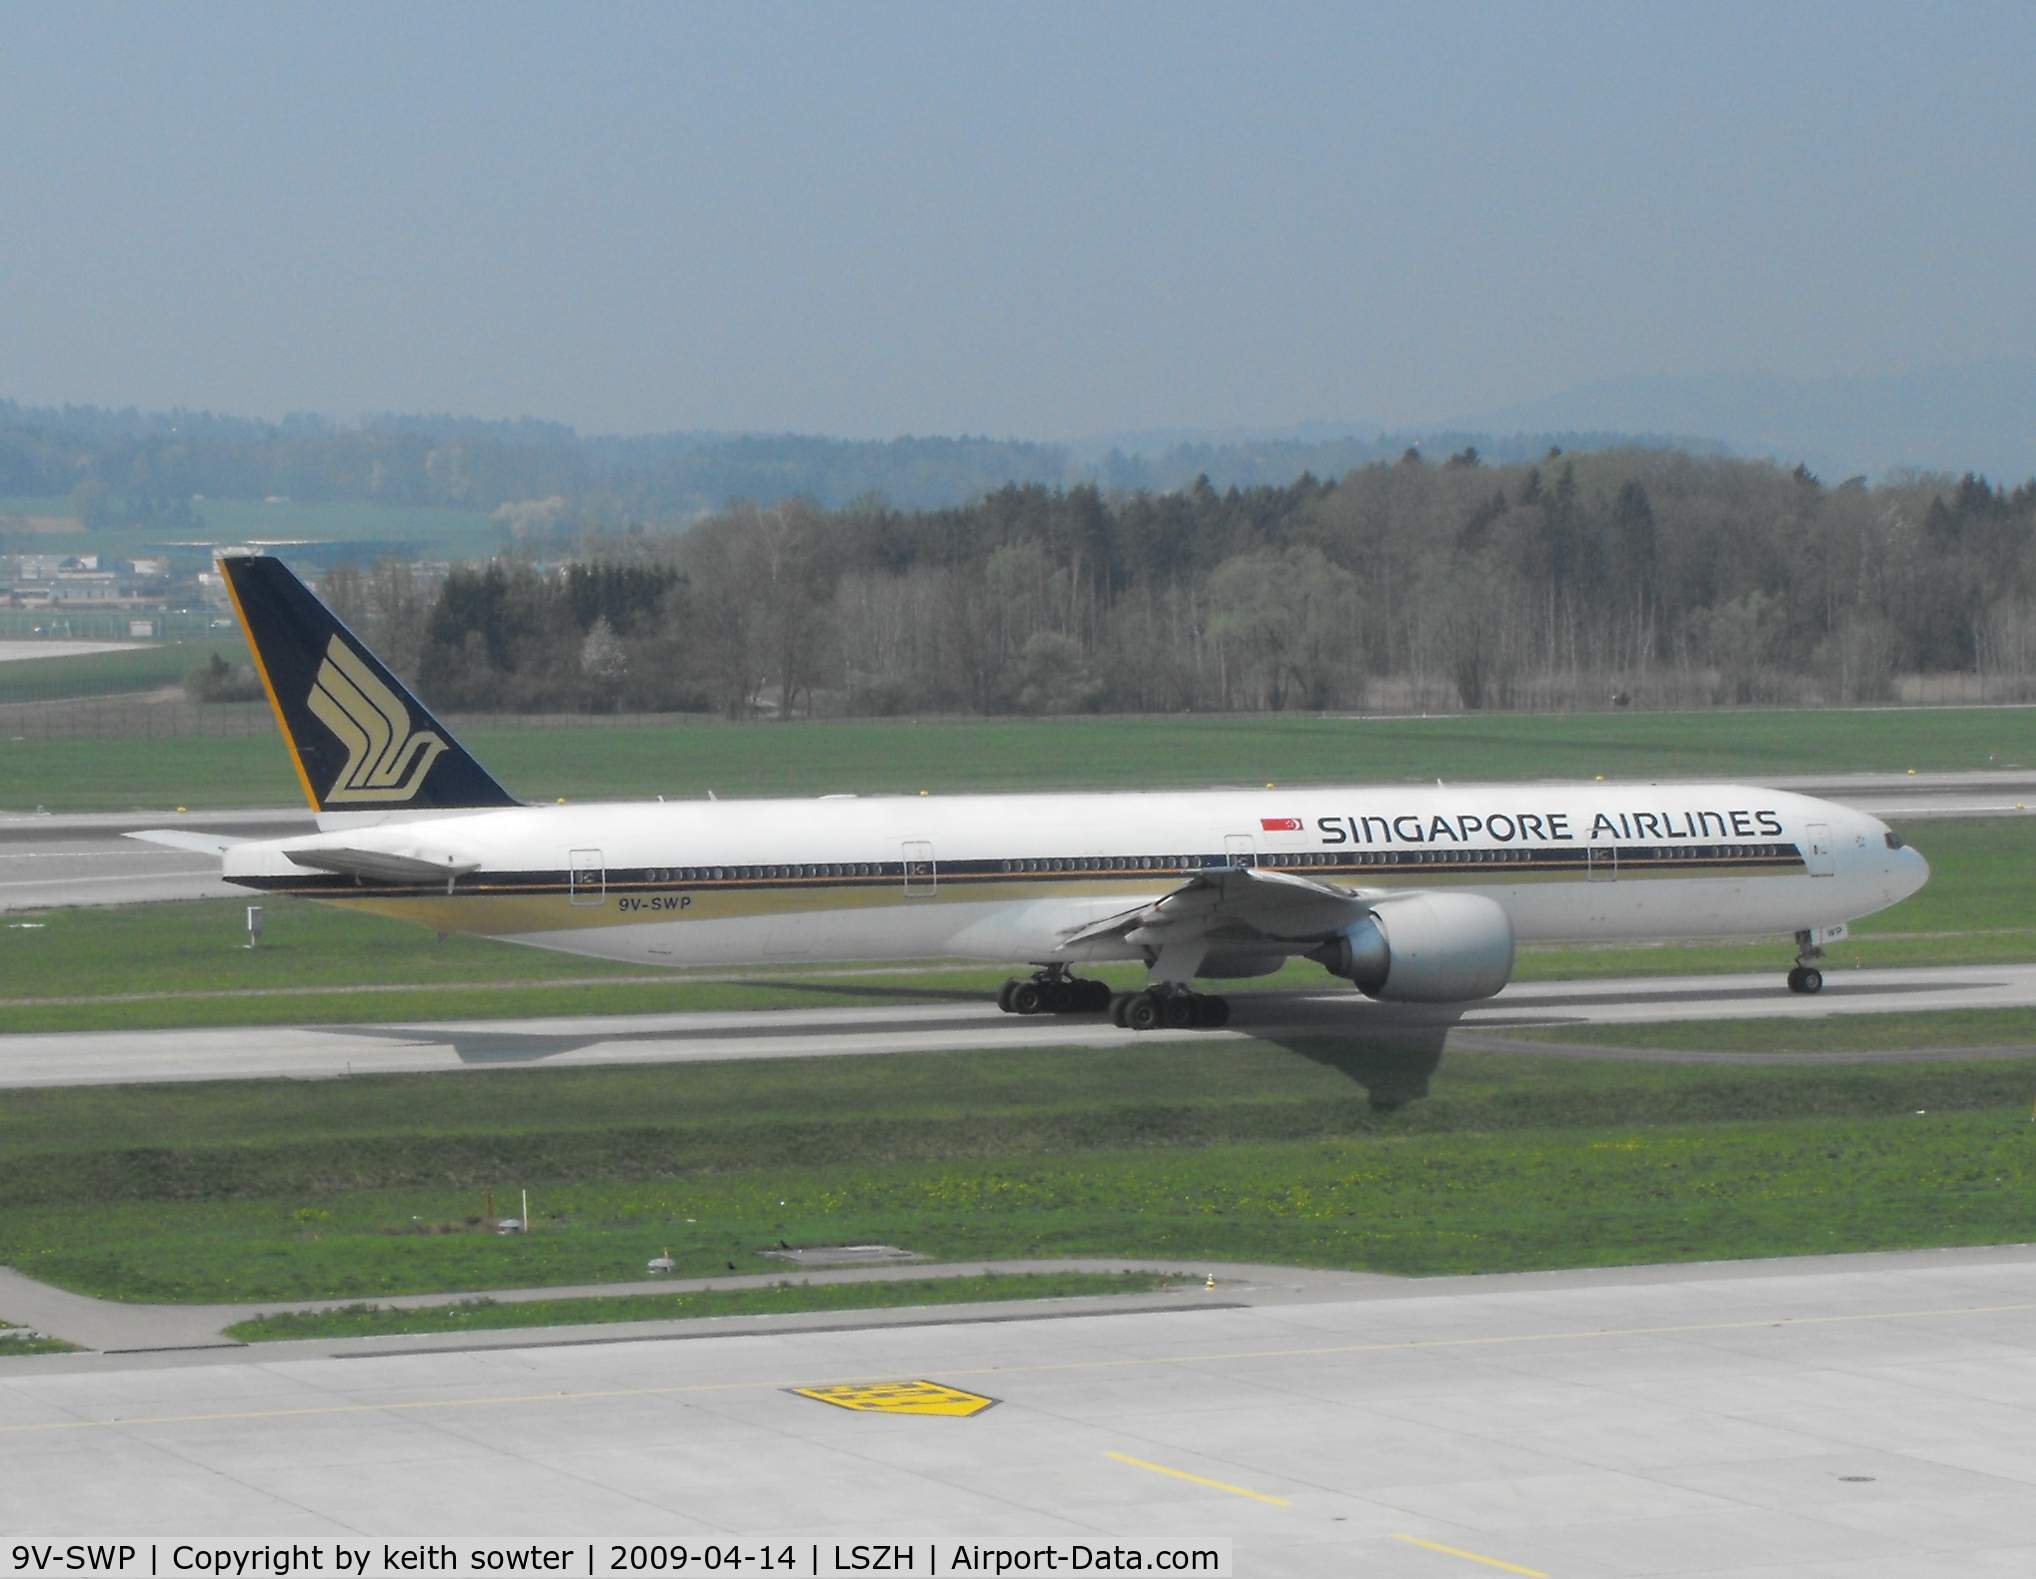 9V-SWP, 2008 Boeing 777-312/ER C/N 34581, Taken from the excellent Viewing Deck 